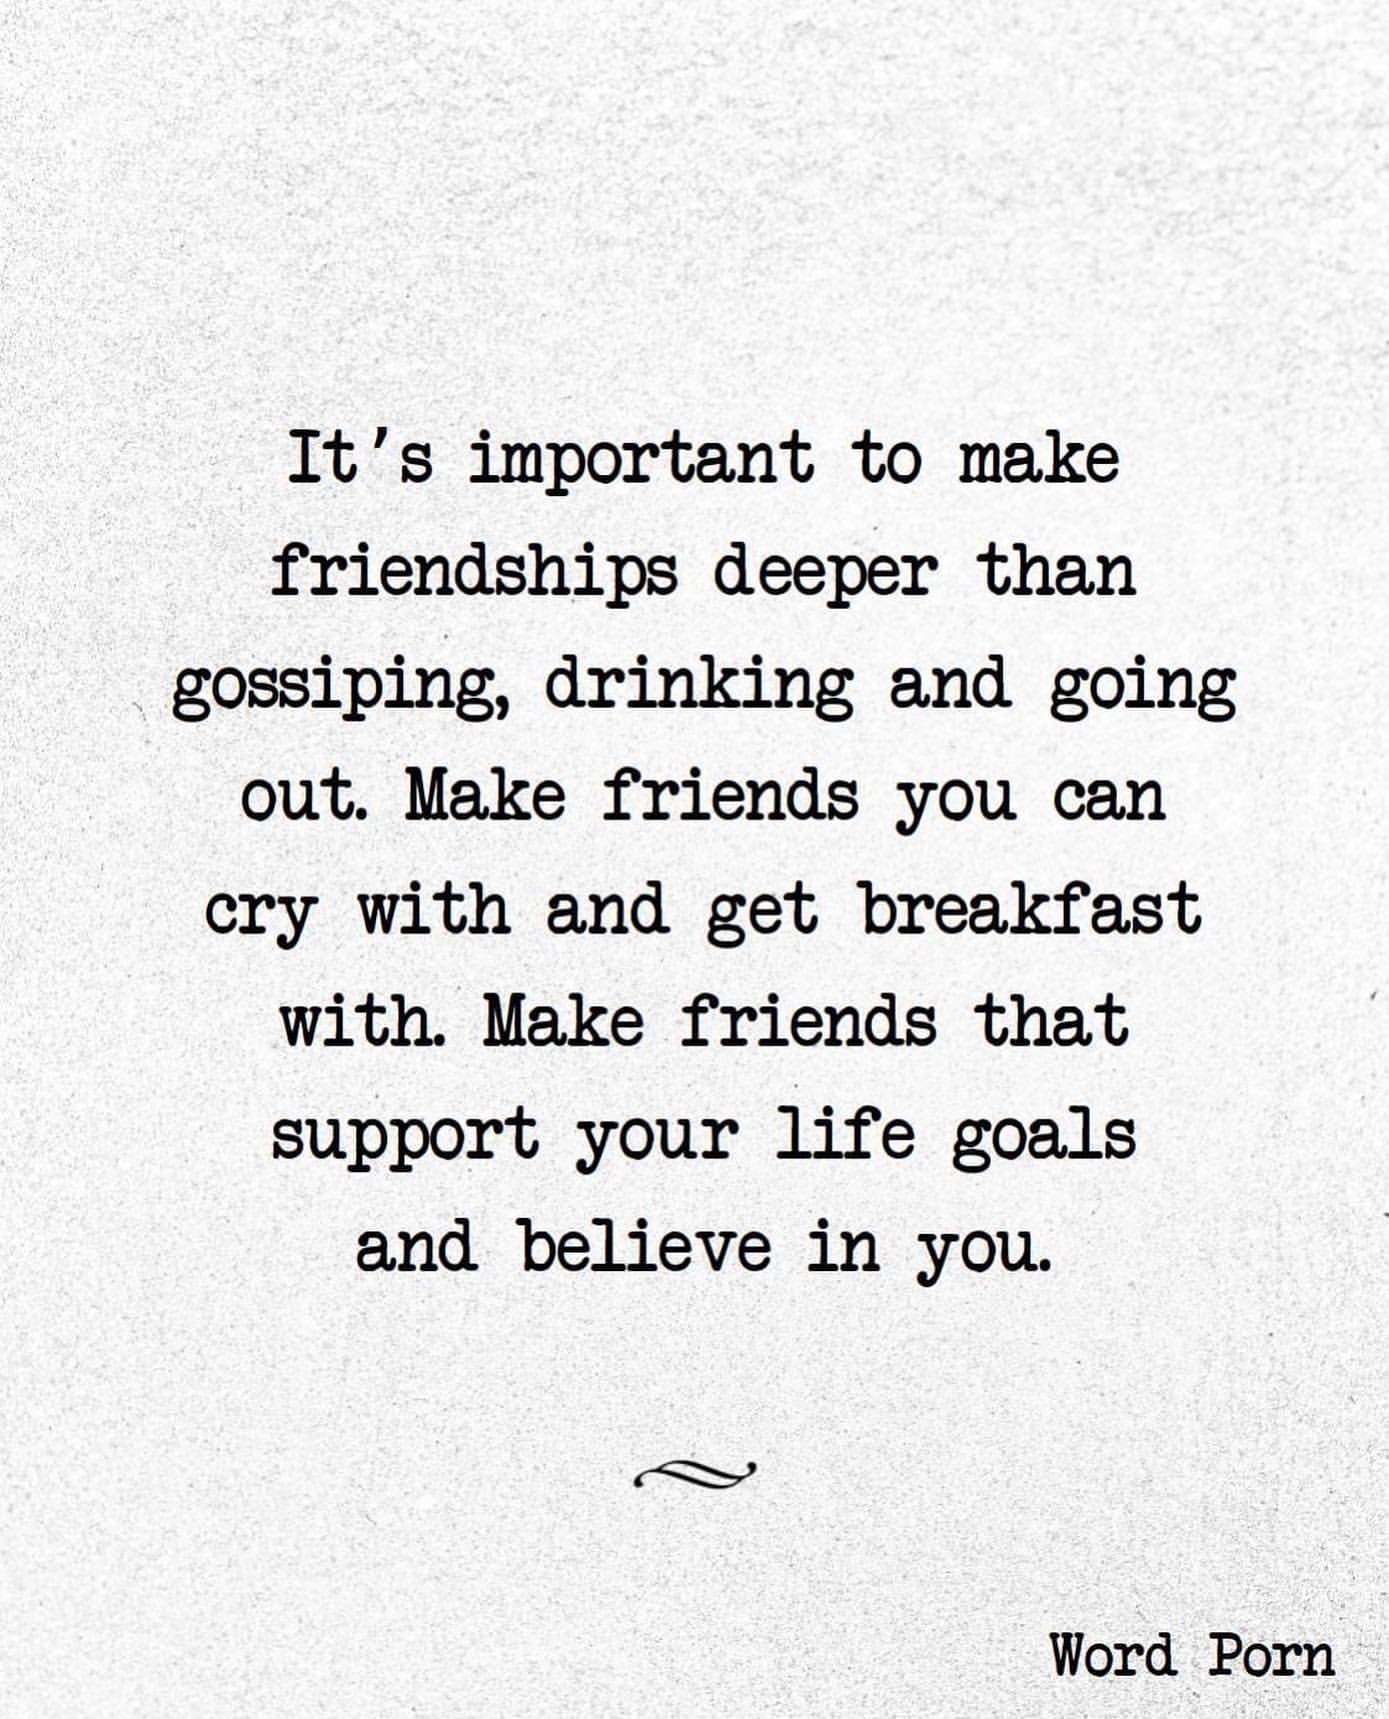 It's important to make friendships deeper than gossiping, drinking and going out. Make friends you can cry with and get breakfast with. Make friends that support your life goals and believe in you.